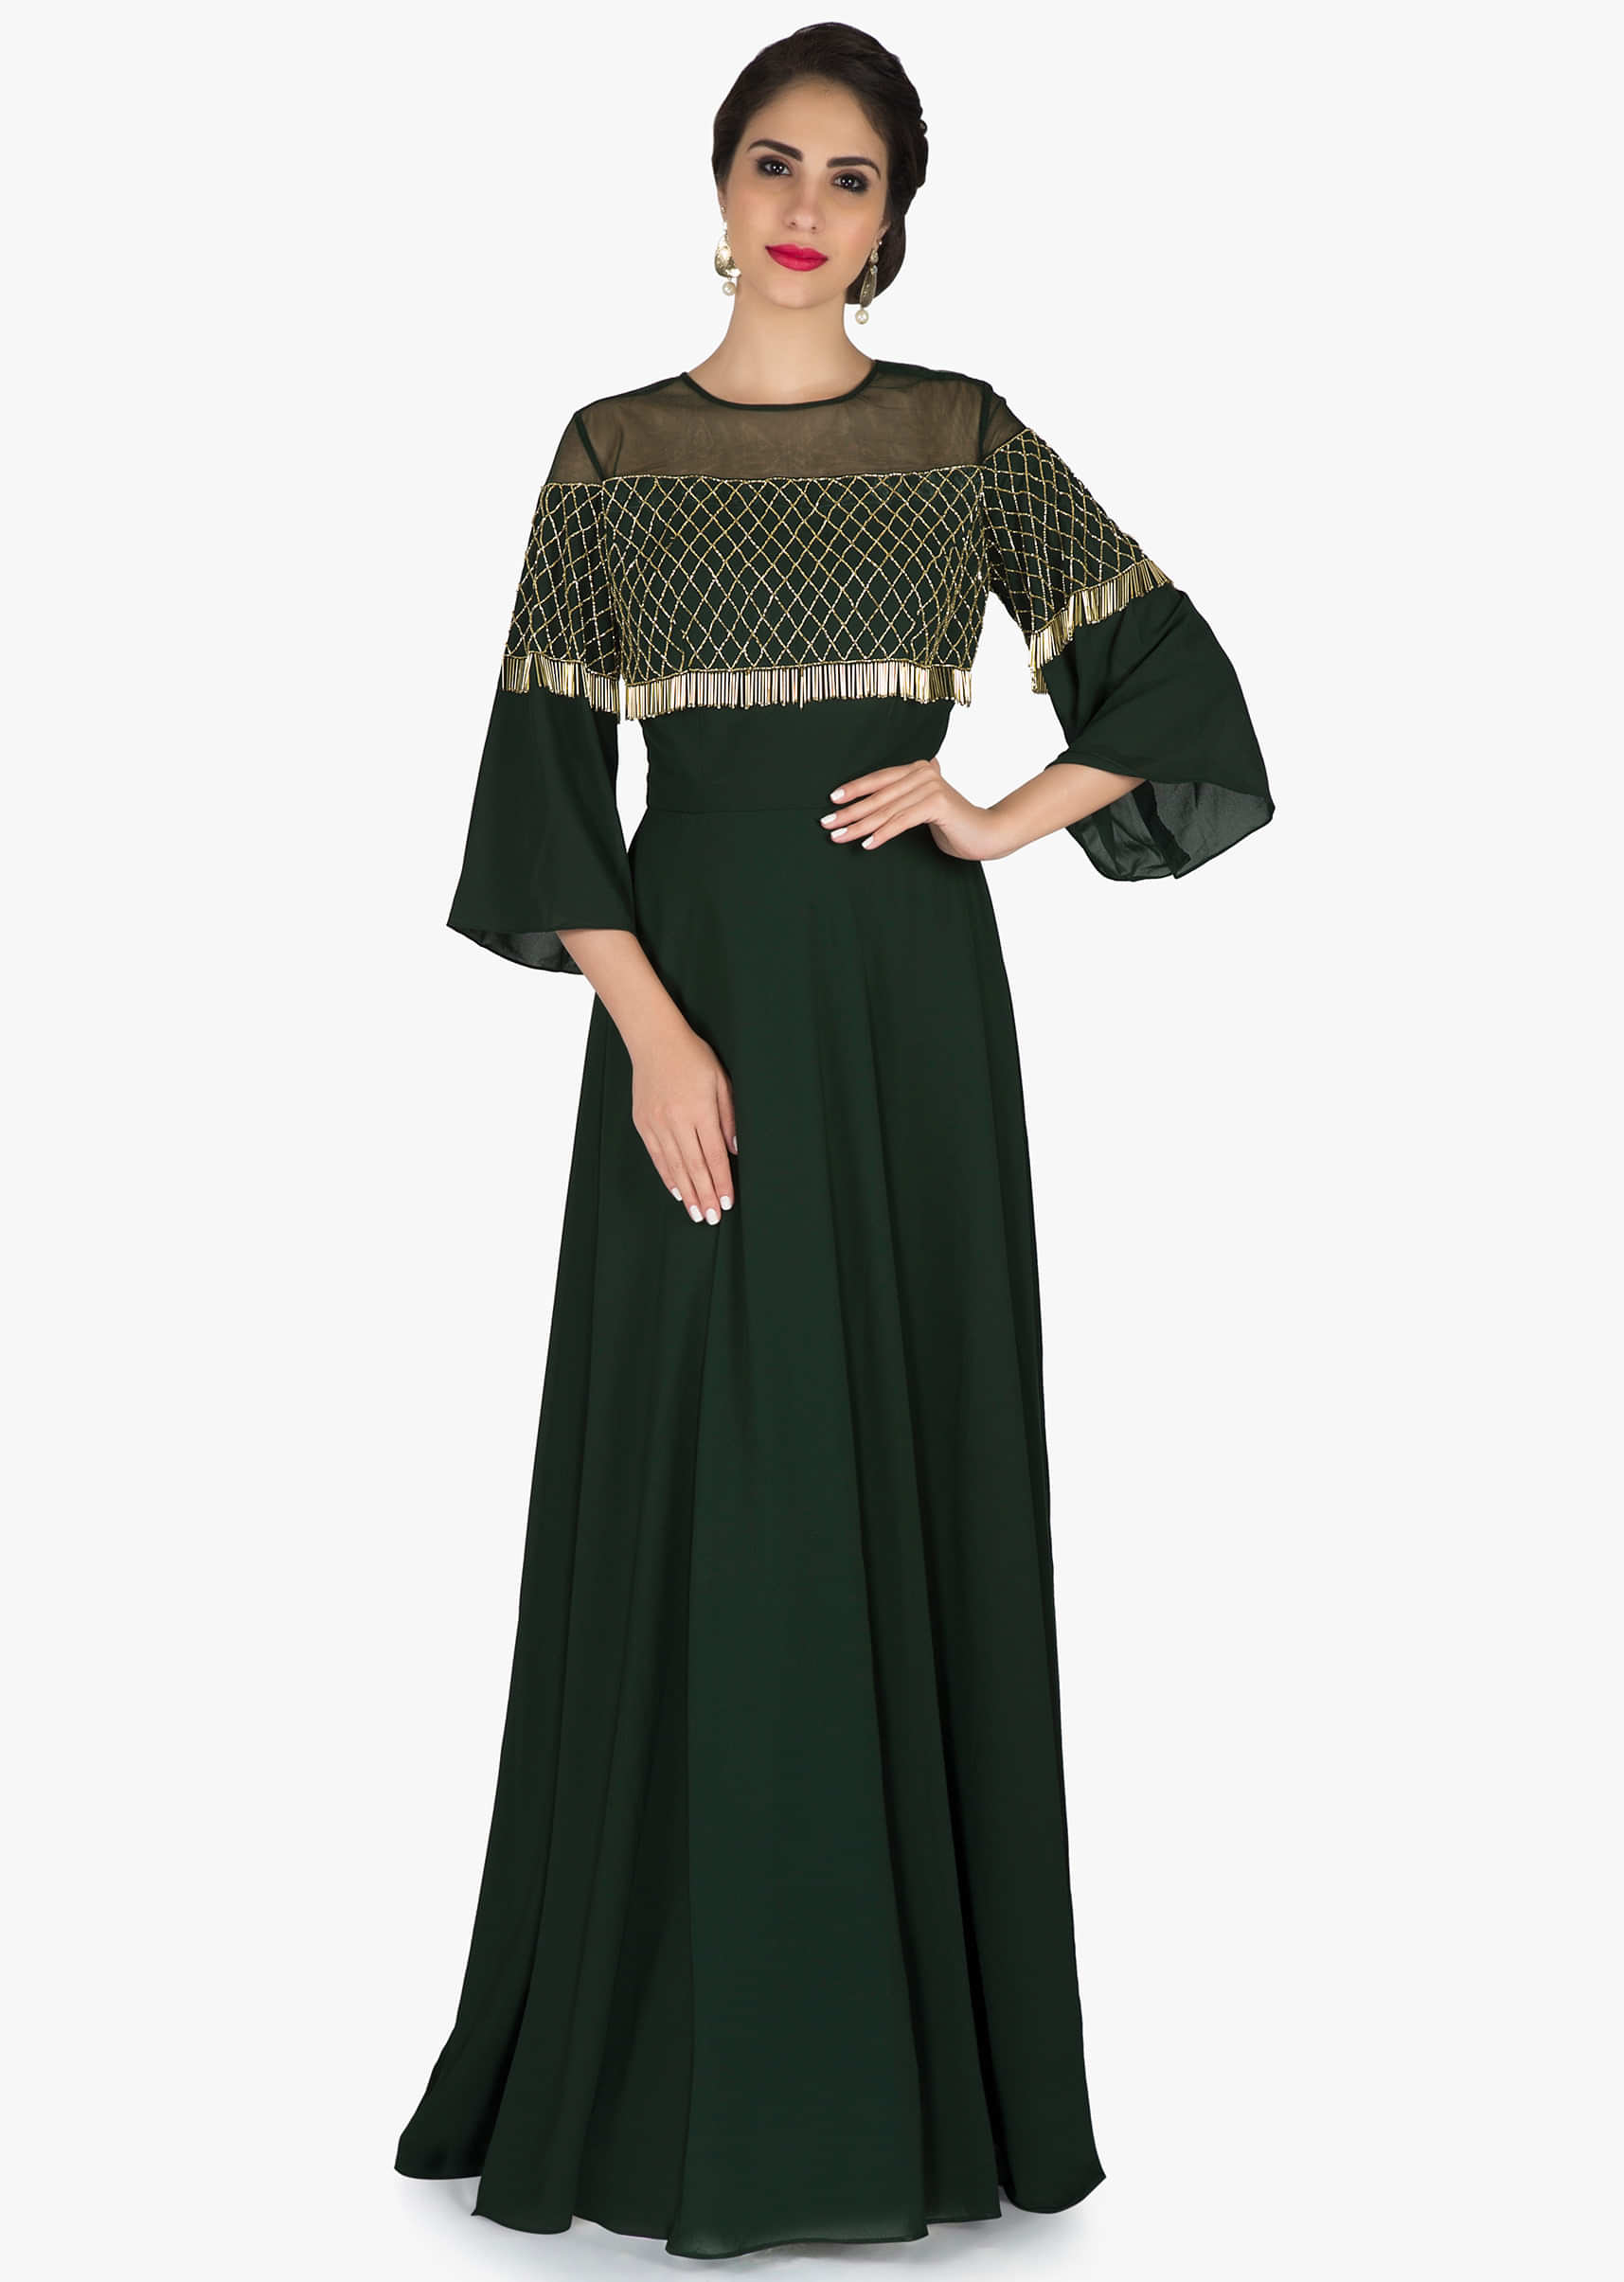 Moss green dress in georgette with cut dana and tassel work only on Kalki